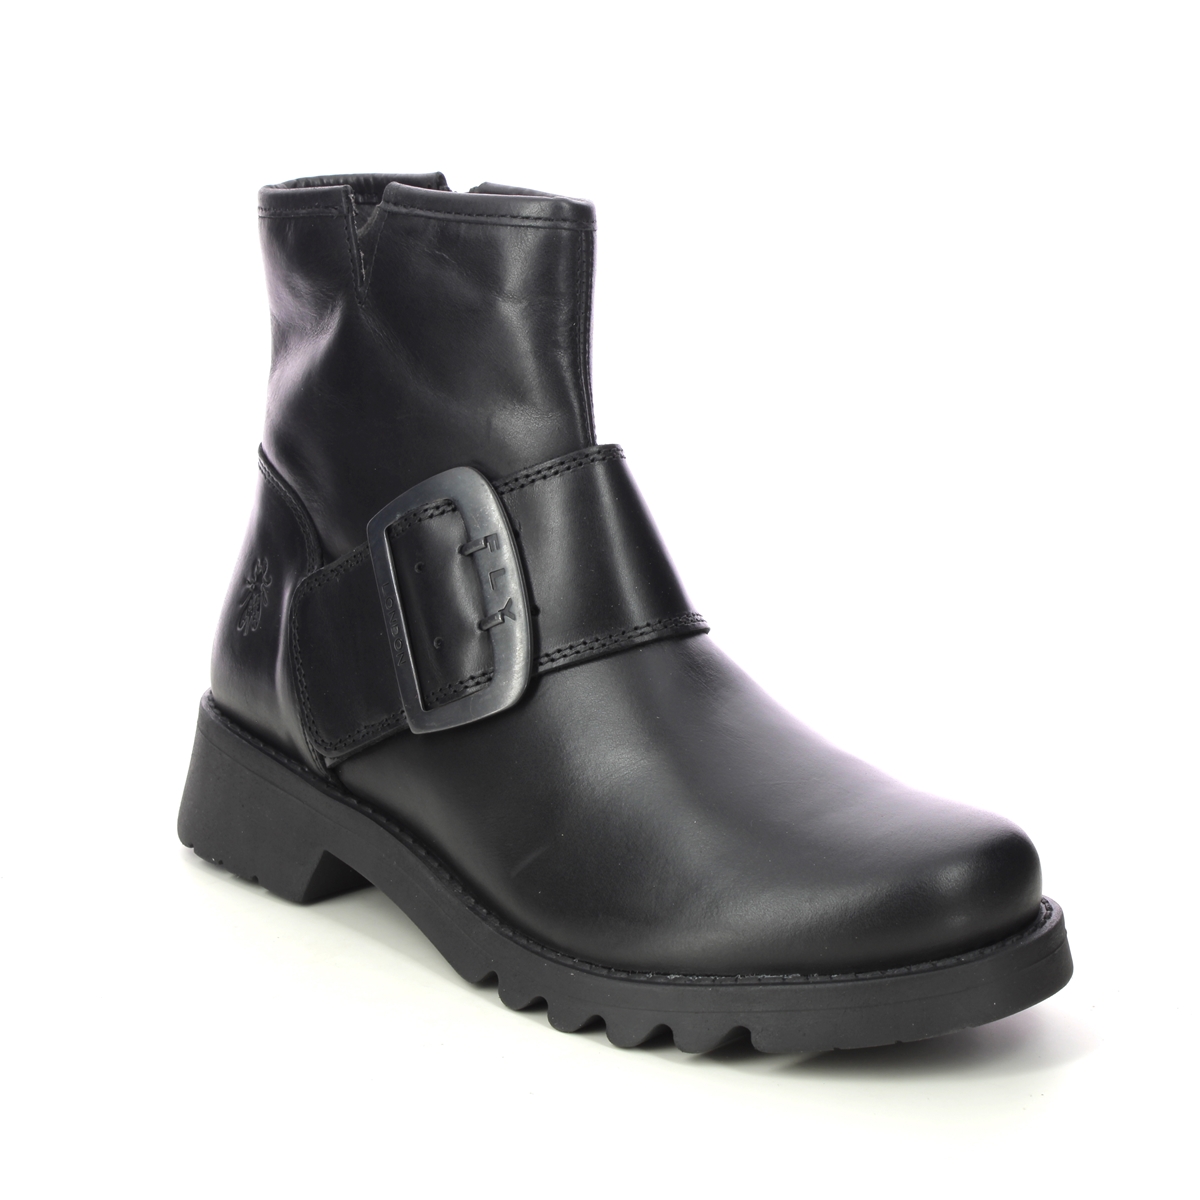 Fly London Rily   Ronin Black Leather Womens Ankle Boots P144991 In Size 39 In Plain Black Leather